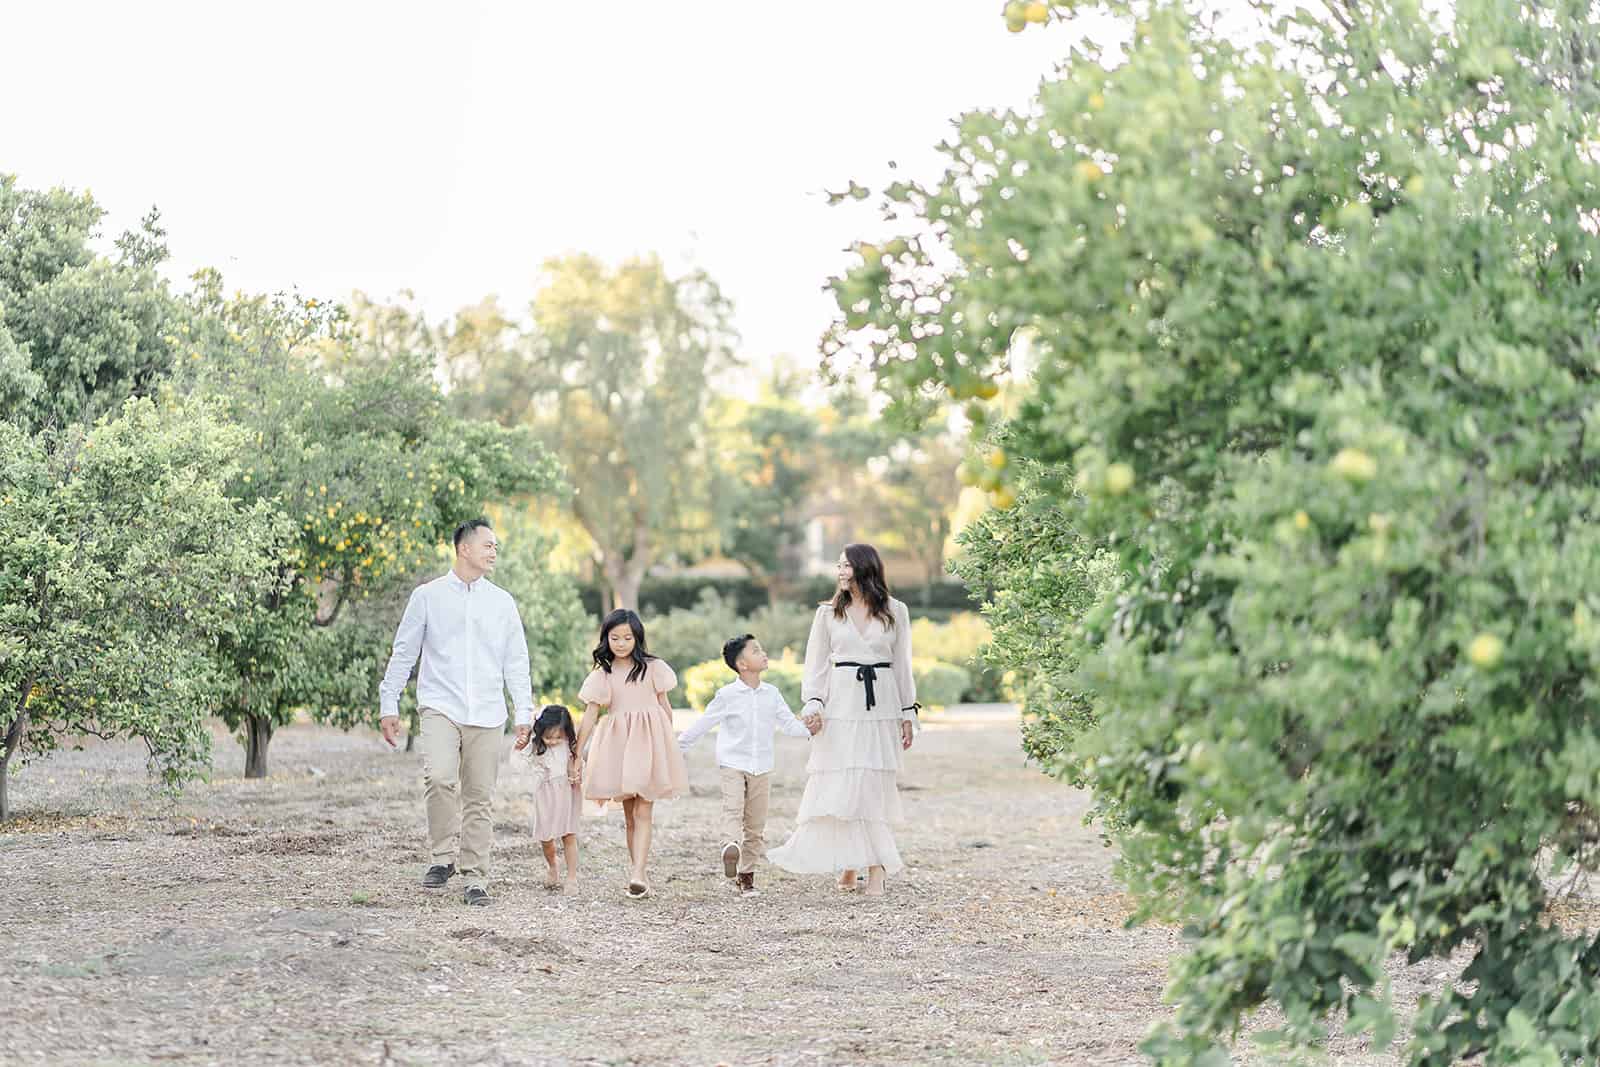 A mom and dad hold hands with their three young children as they walk through an orange grove after attending Irvine Chinese School